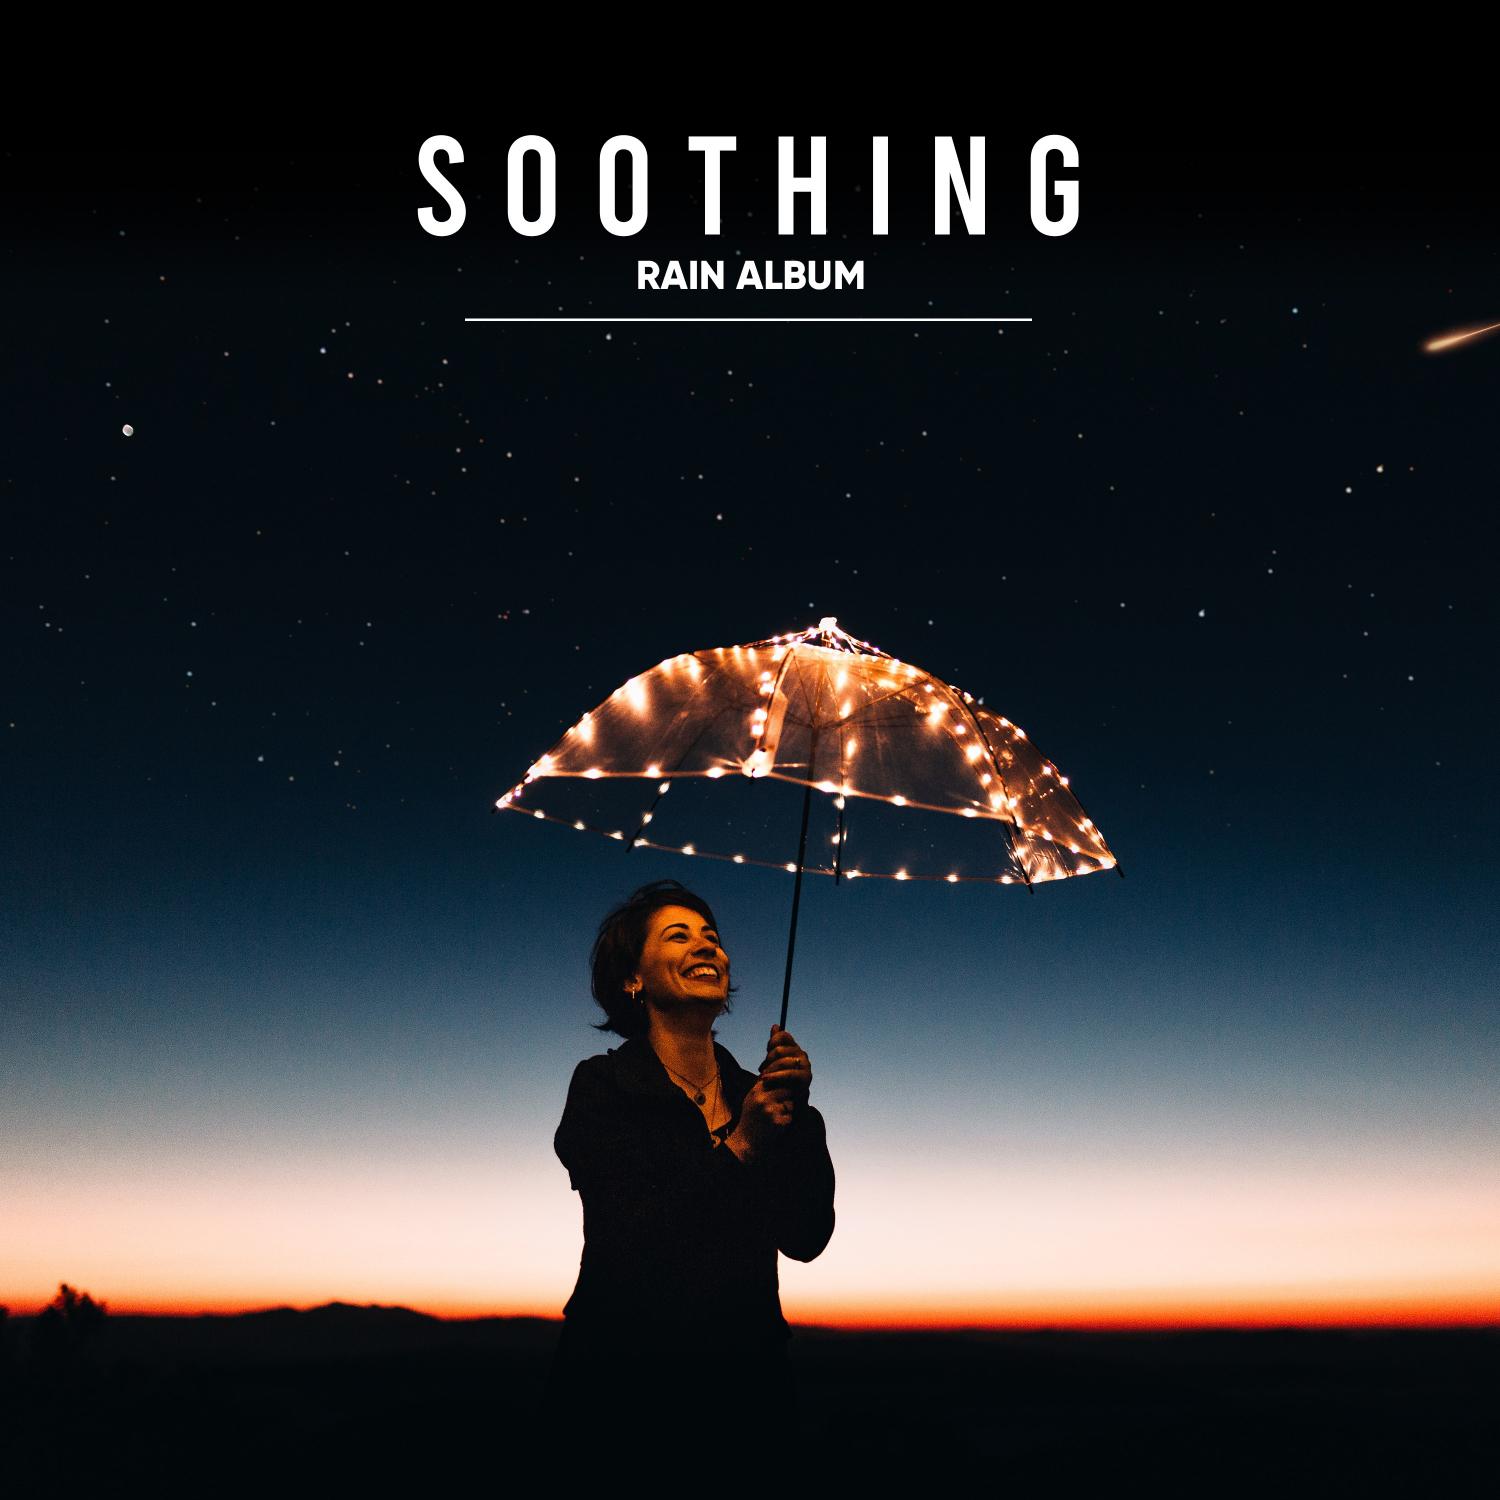 12 Soothing Rain Album to Chill Out